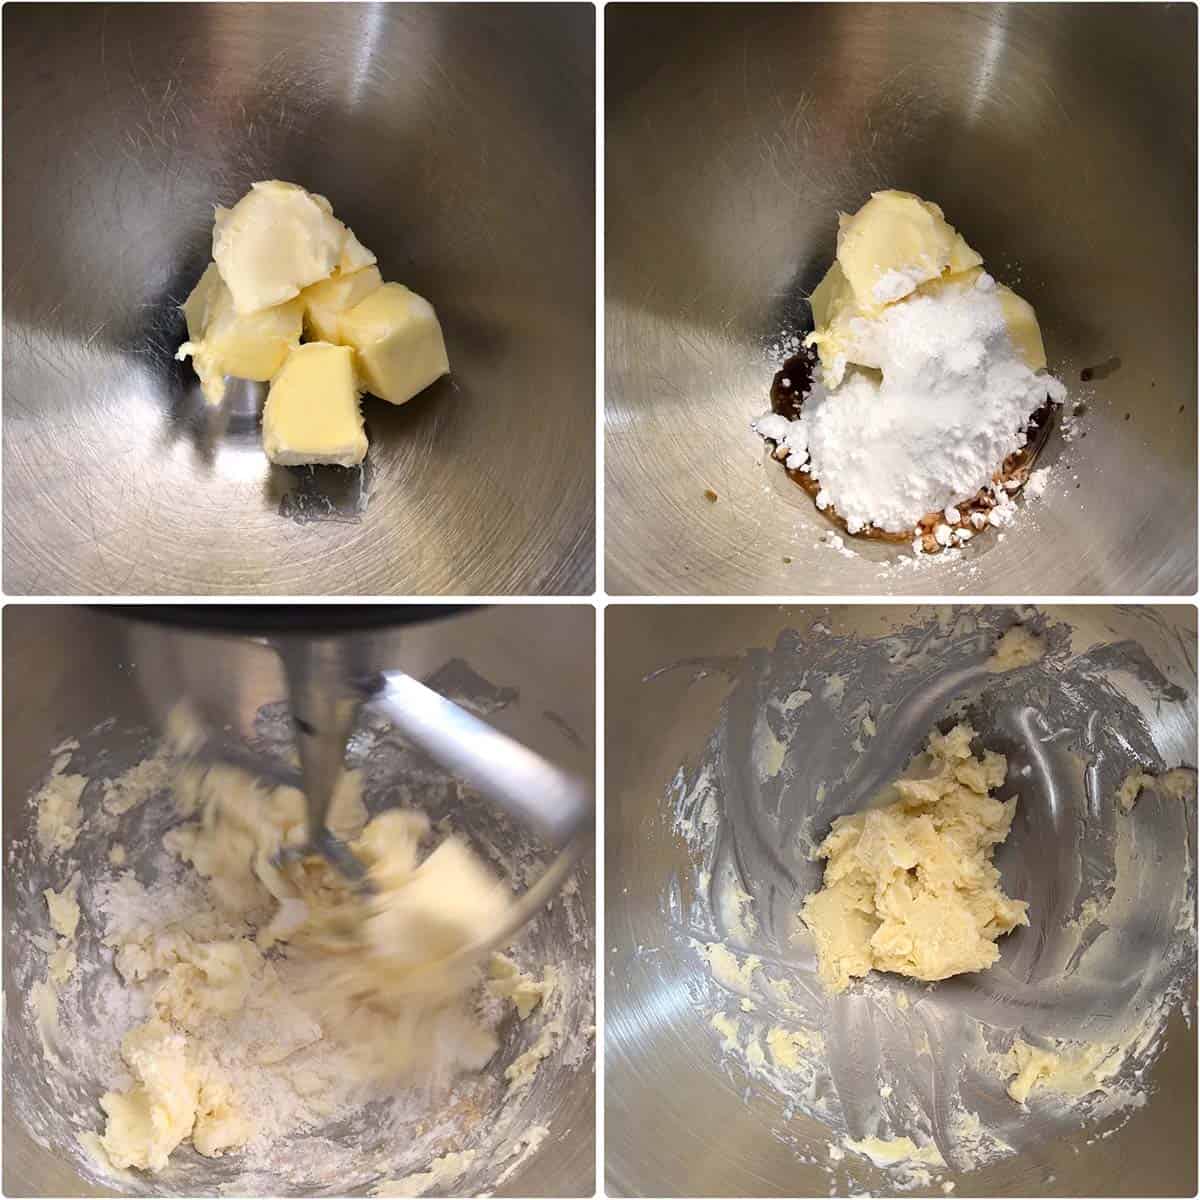 4 panel photo showing the beating of butter and sugar in a bowl.